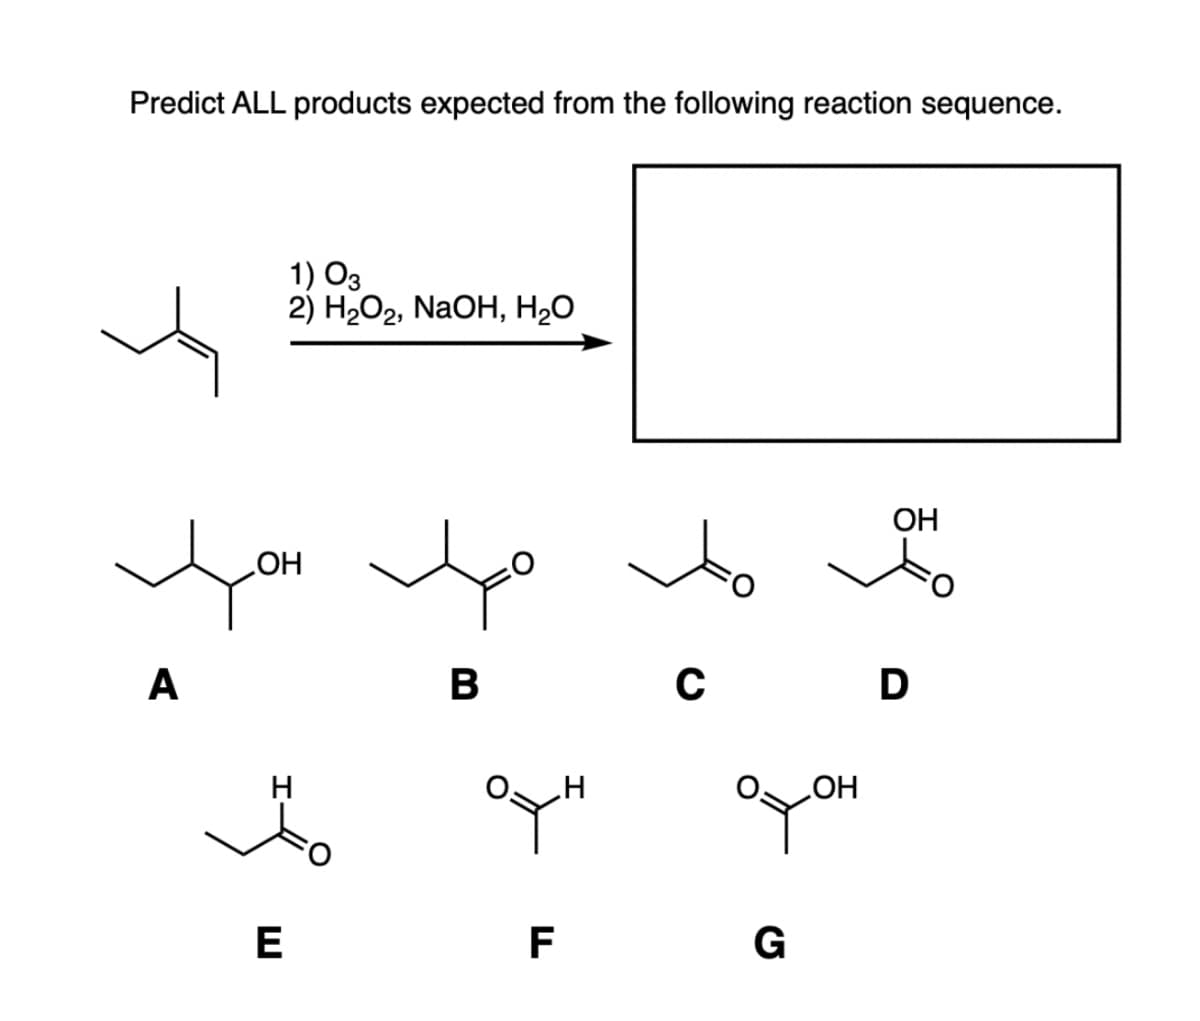 Predict ALL products expected from the following reaction sequence.
1) 03
2) H₂O2, NaOH, H₂O
цон
A
E
4
B
OTH
TI
F
C
офон
G
OH
D